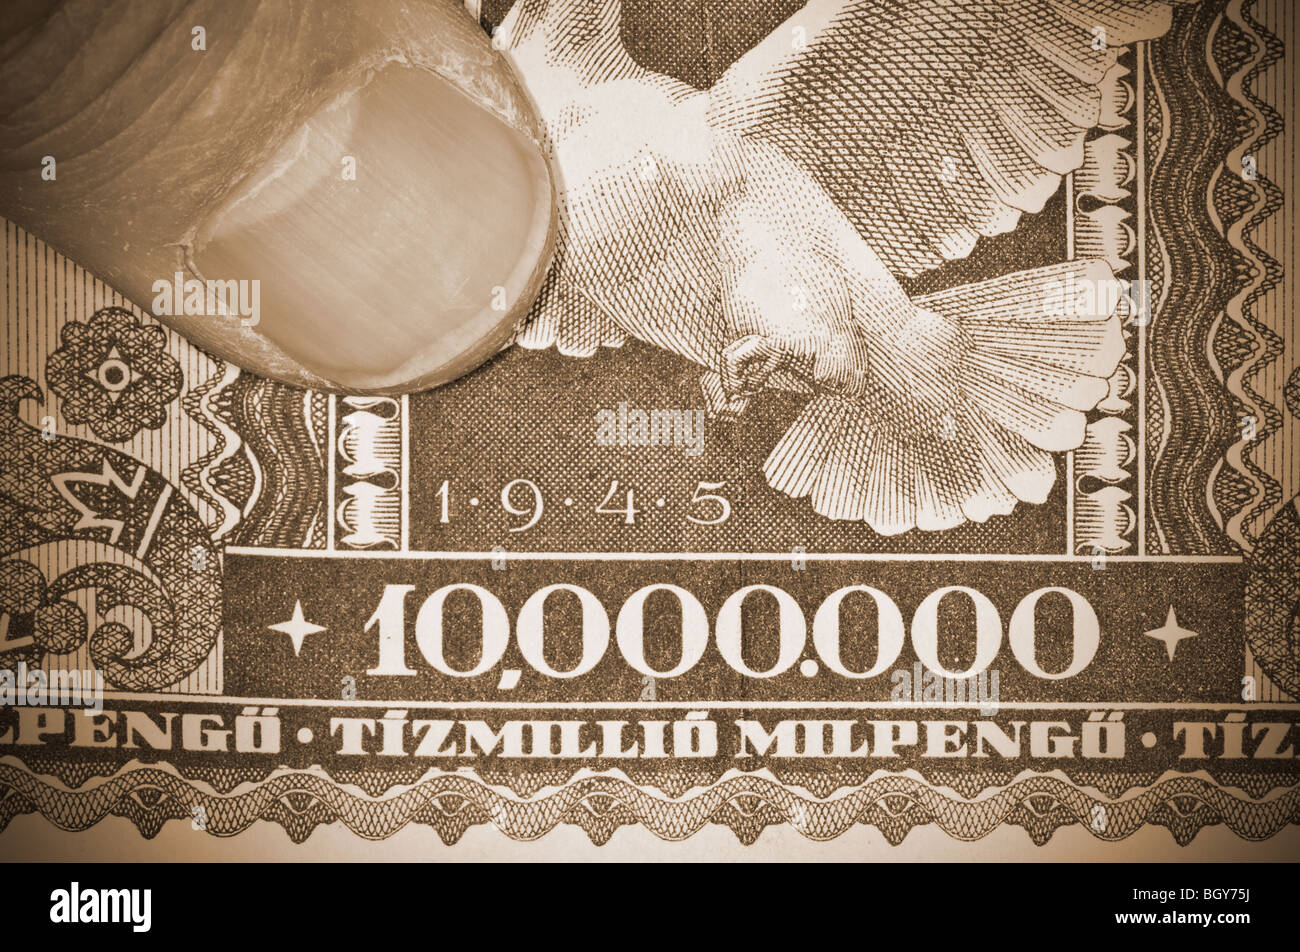 Close-up image of the Ten-Million-Milllion Pengo from the Hungarian hyperinflation started in 1945. Stock Photo